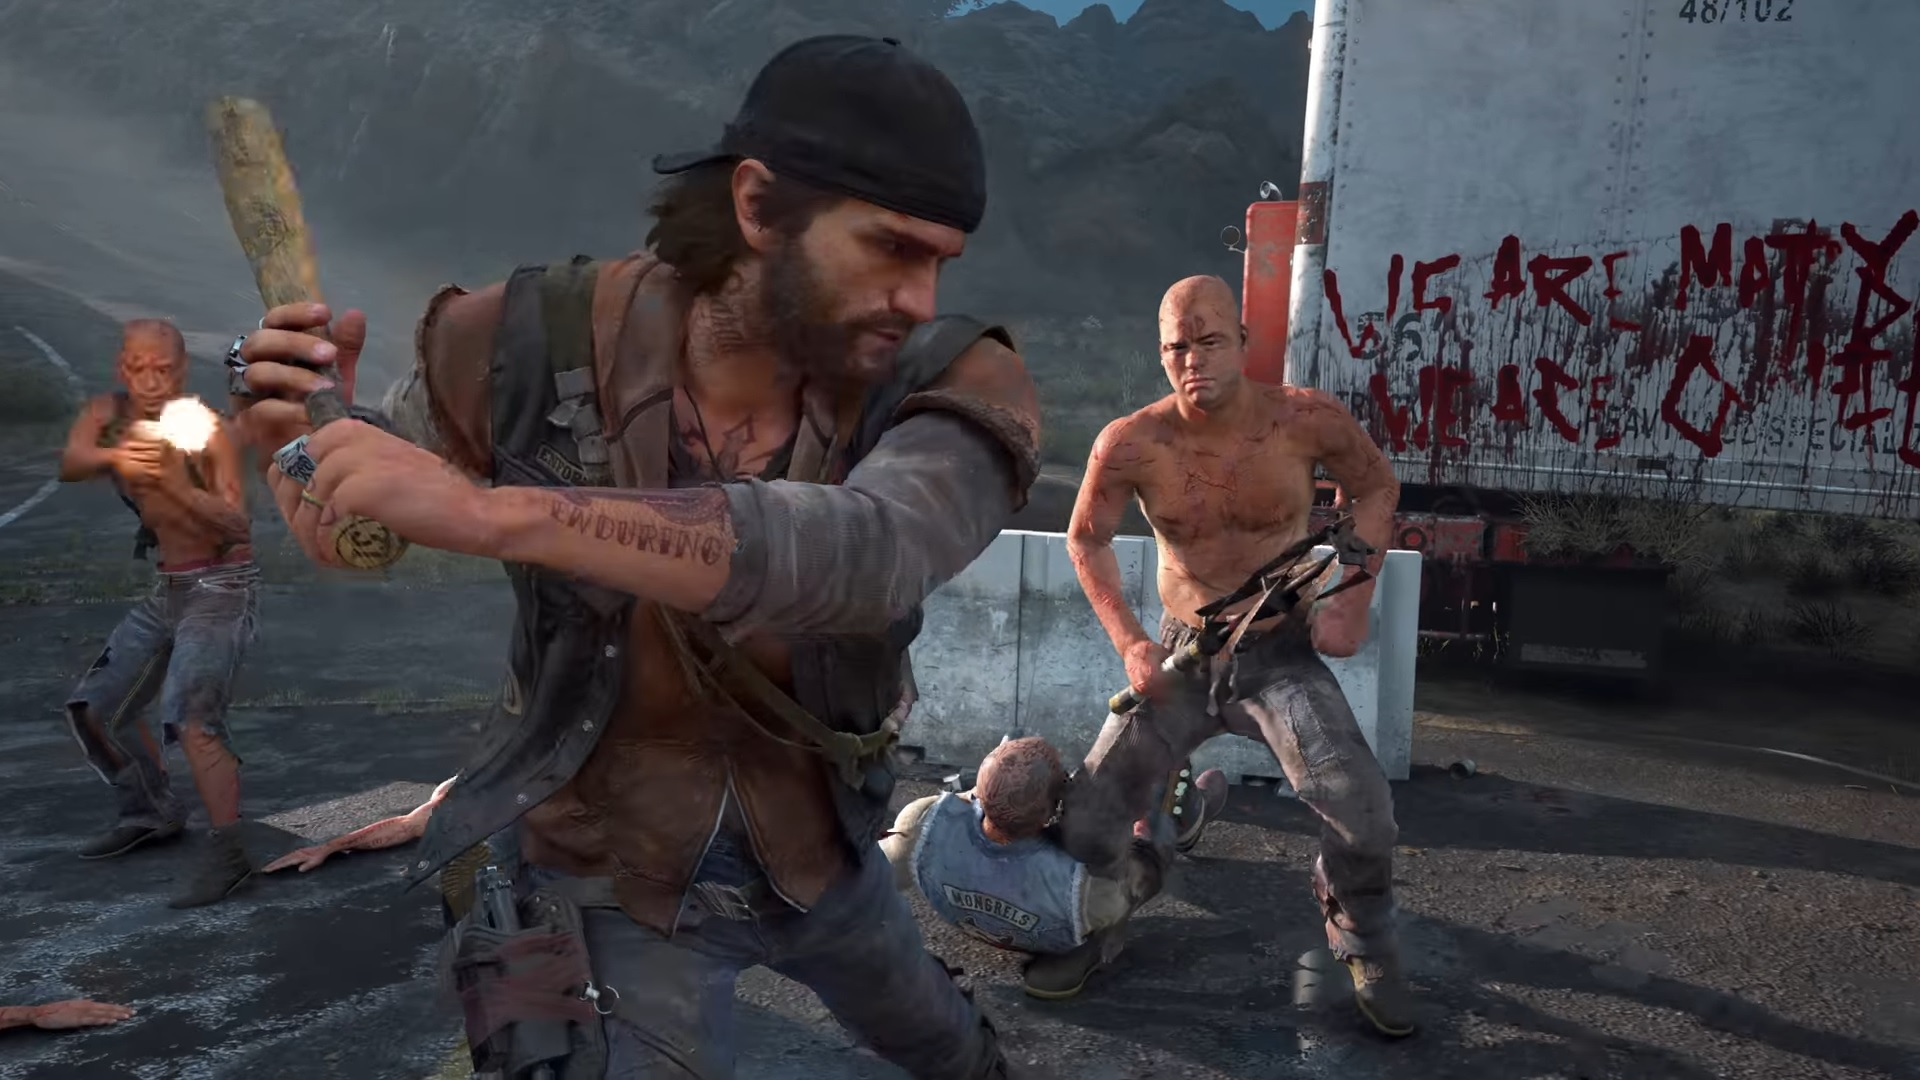 Days Gone release date – latest trailers, news and all you need to know